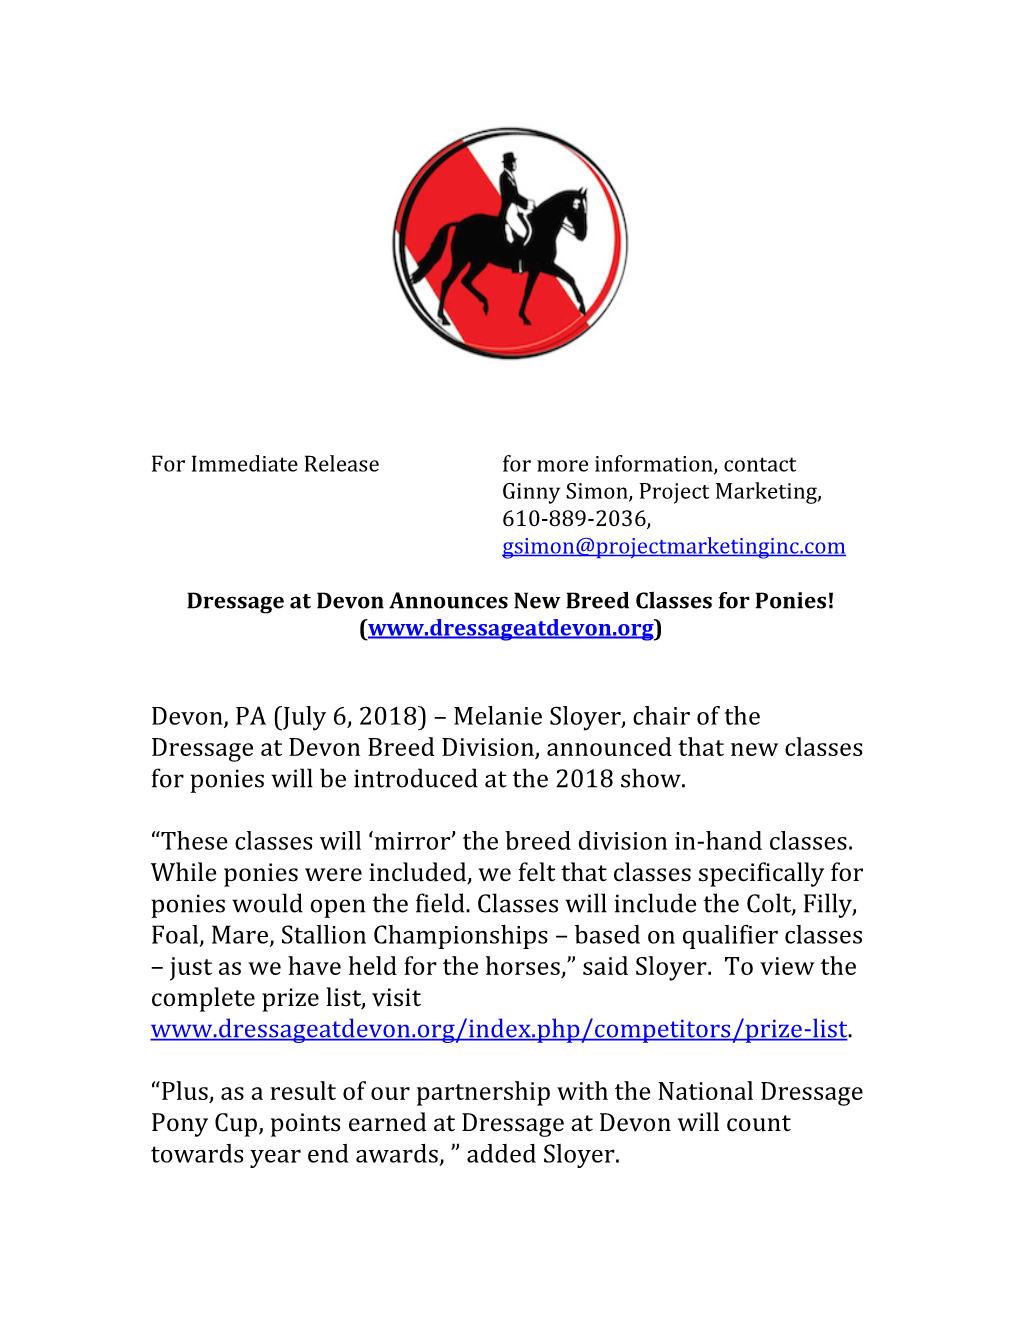 (July 6, 2018) – Melanie Sloyer, Chair of the Dressage at Devon Breed Division, Announced That New Classes for Ponies Will Be Introduced at the 2018 Show